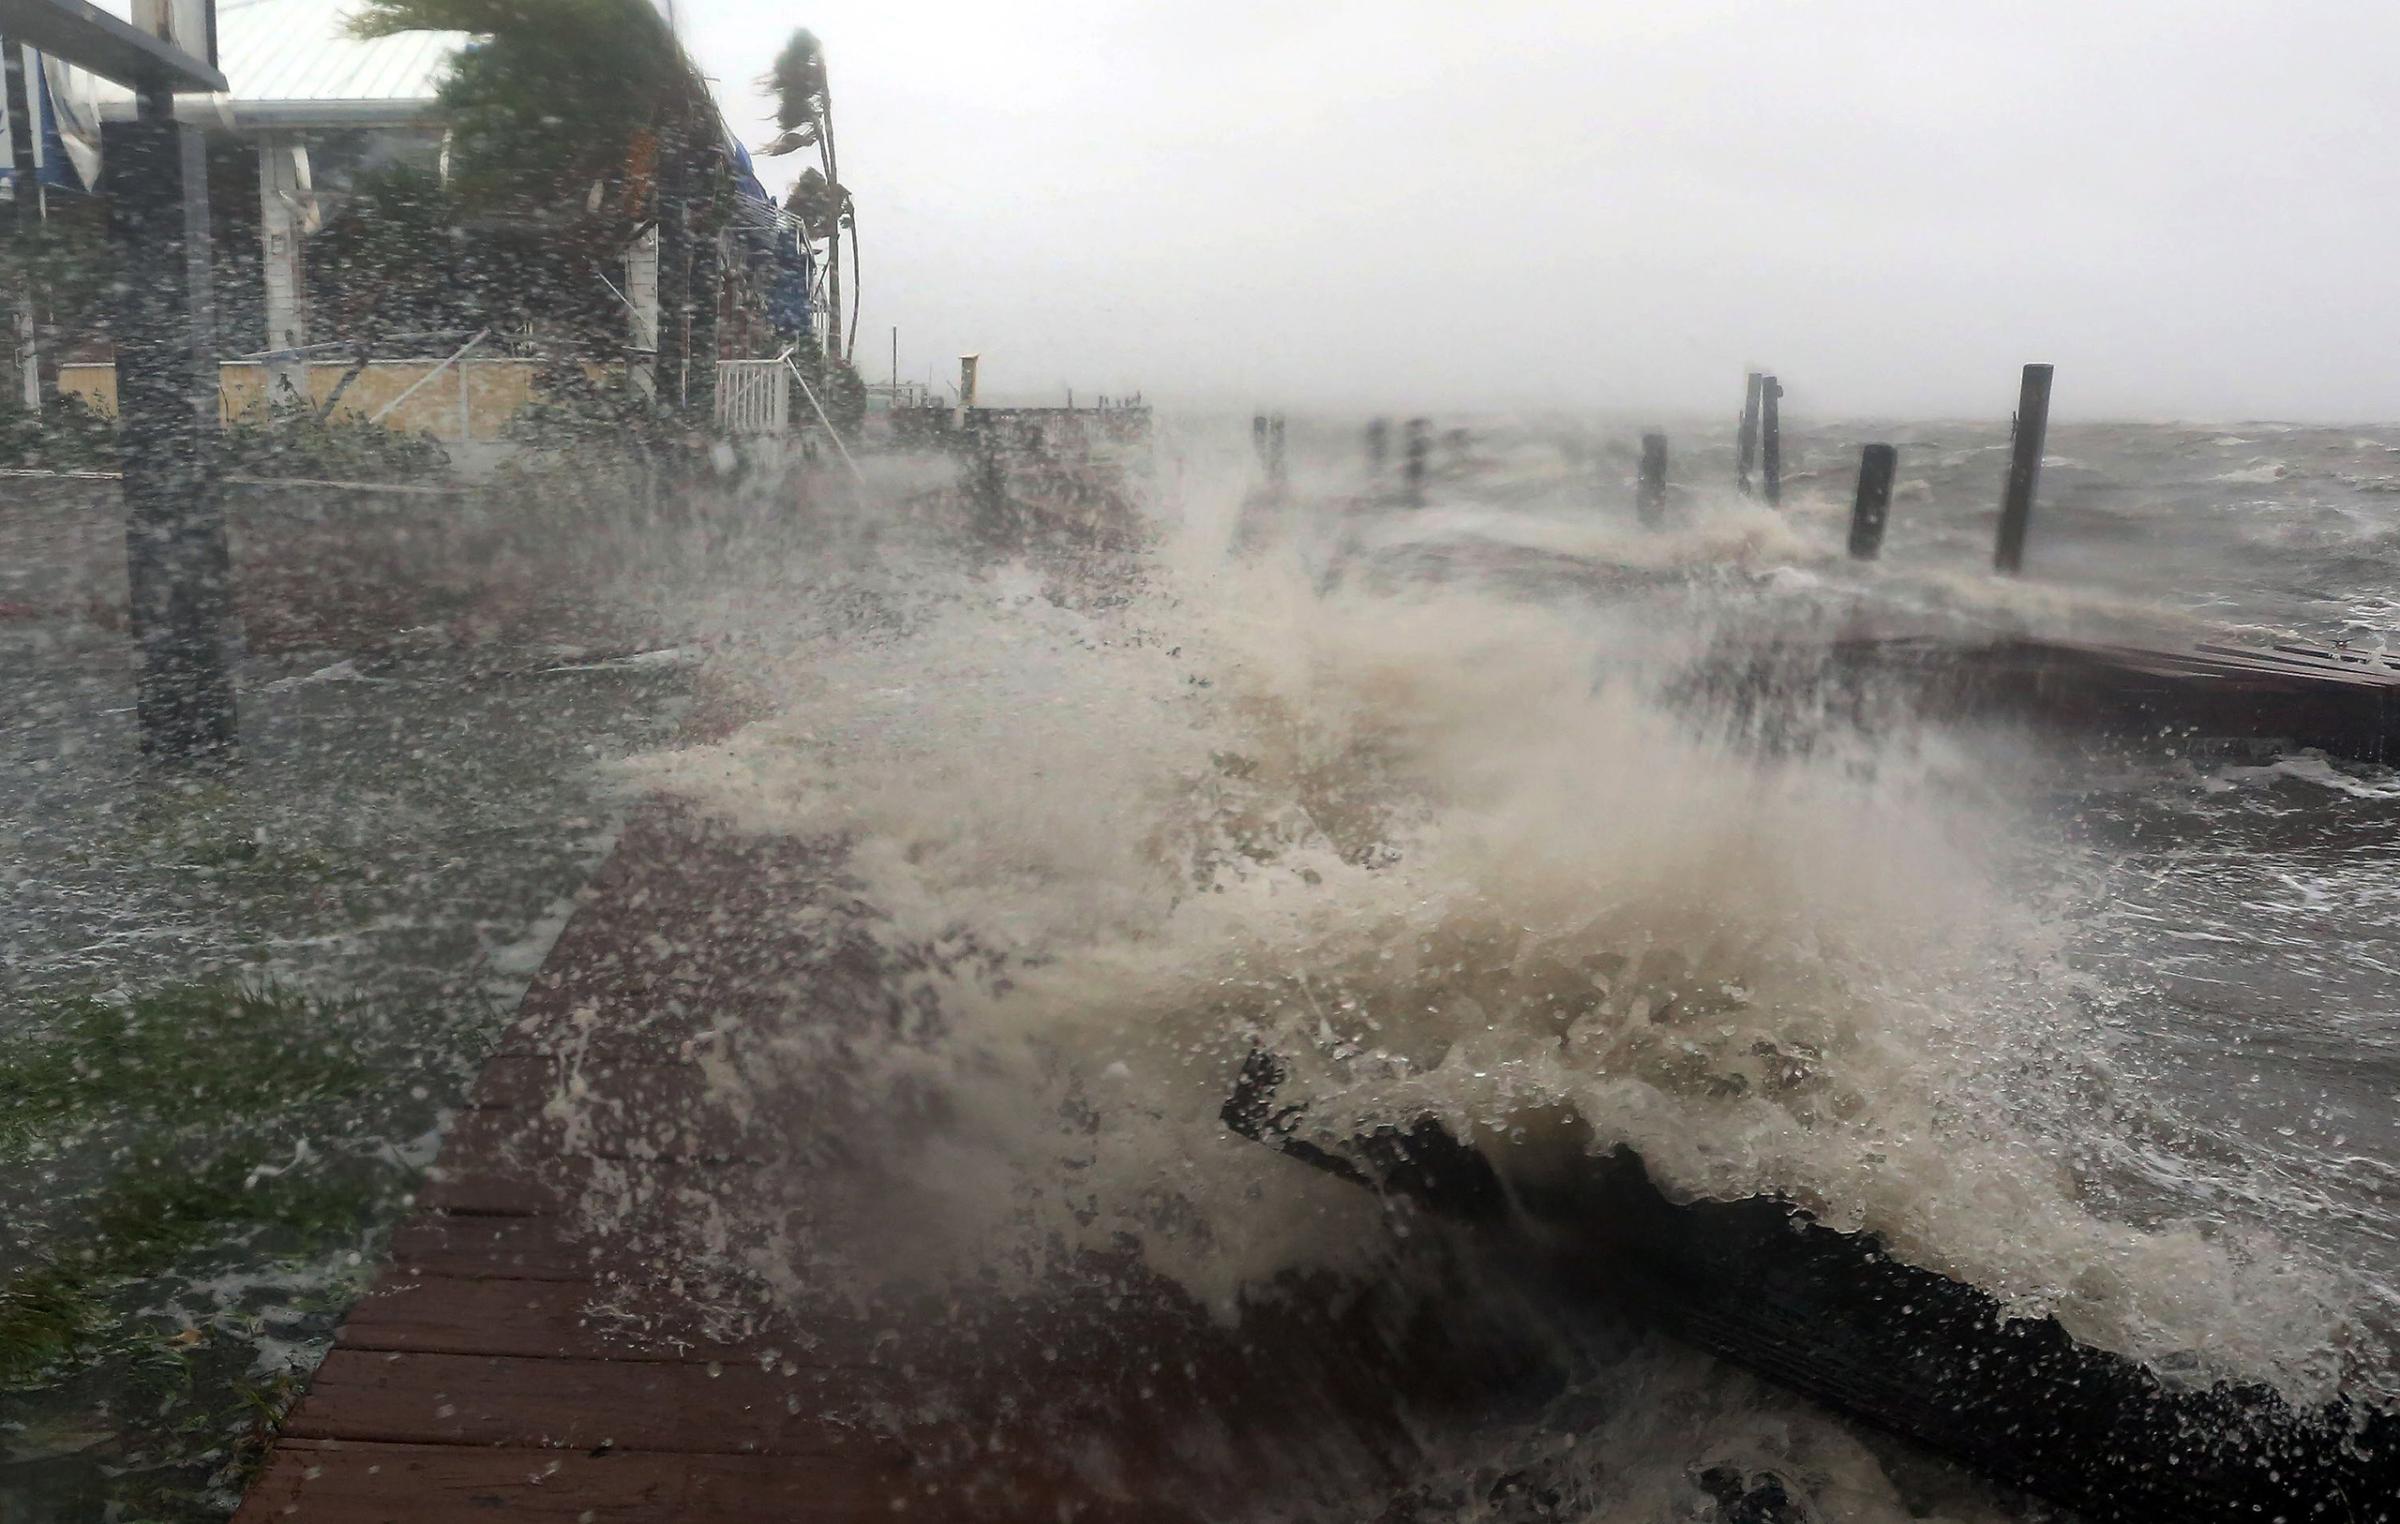 Surf from the Banana River crashes up on a dock at Sunset Grill in Cocoa Beach, Fla., as Hurricane Matthew hits Florida's east coast, Oct. 7, 2016.